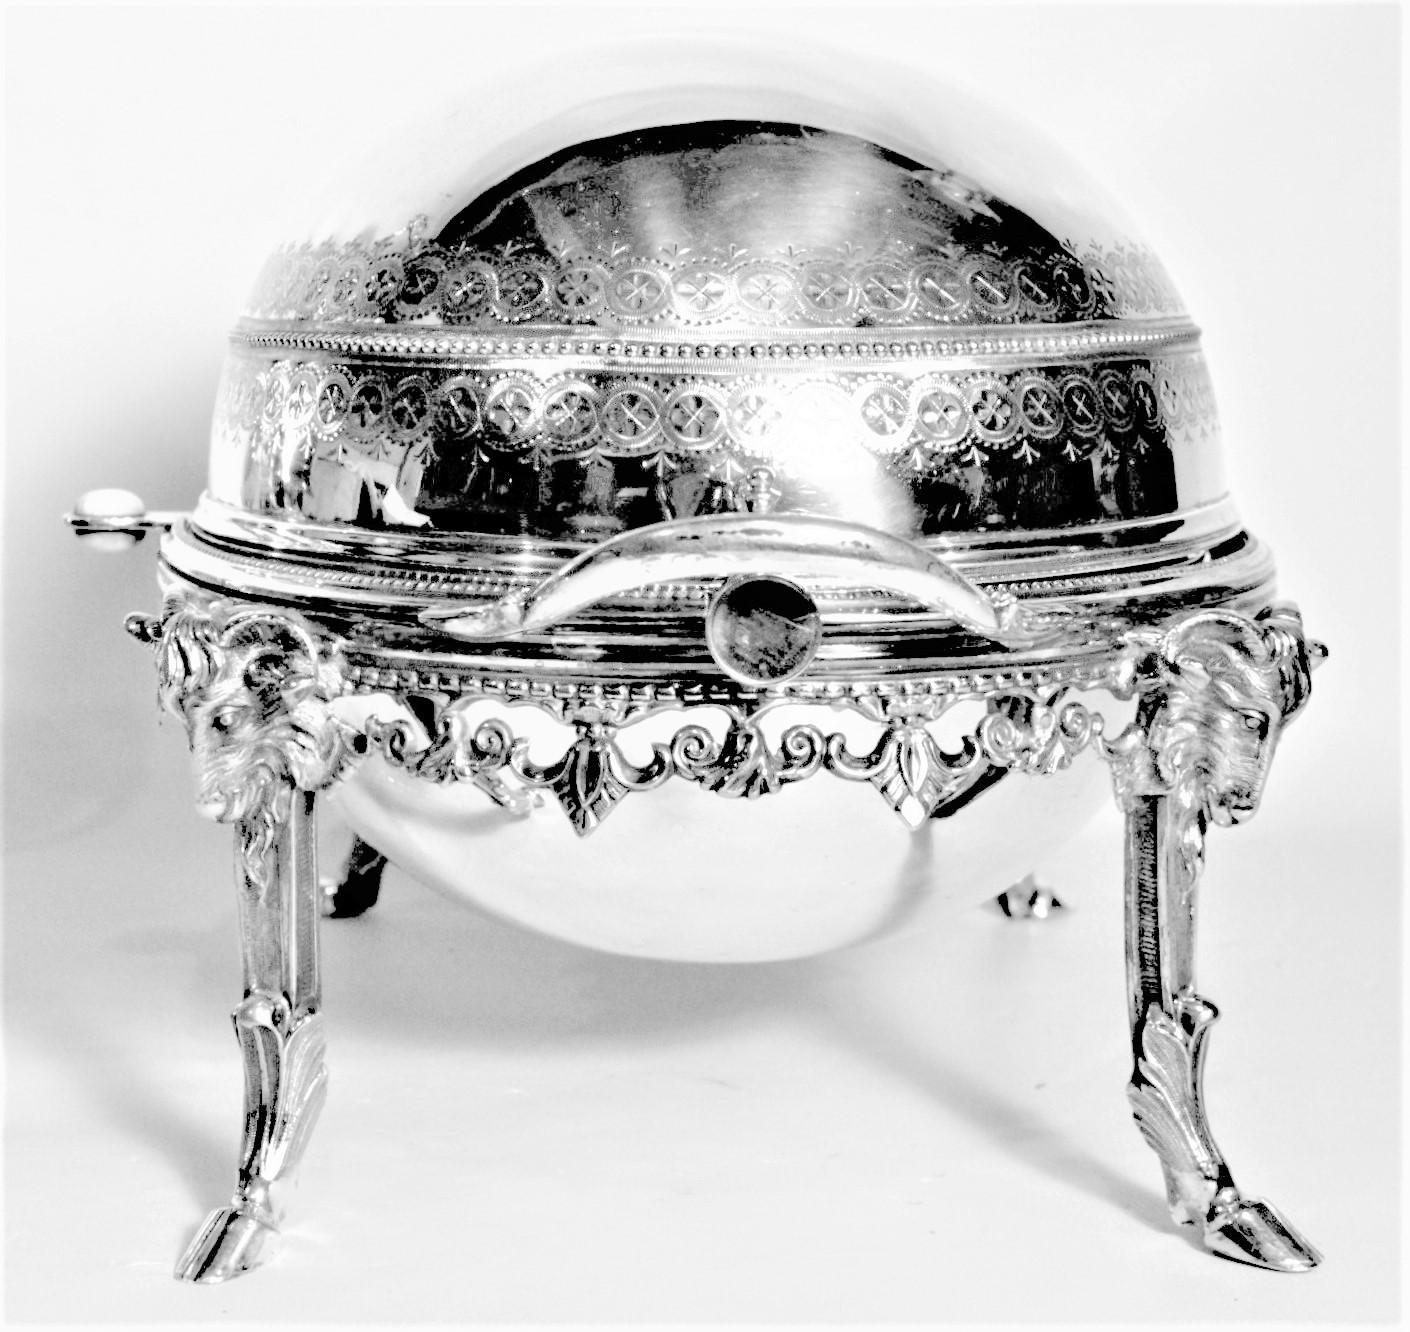 Metal Antique English Silver Plated Revolving Breakfast Dome with Figural Ram Accents For Sale